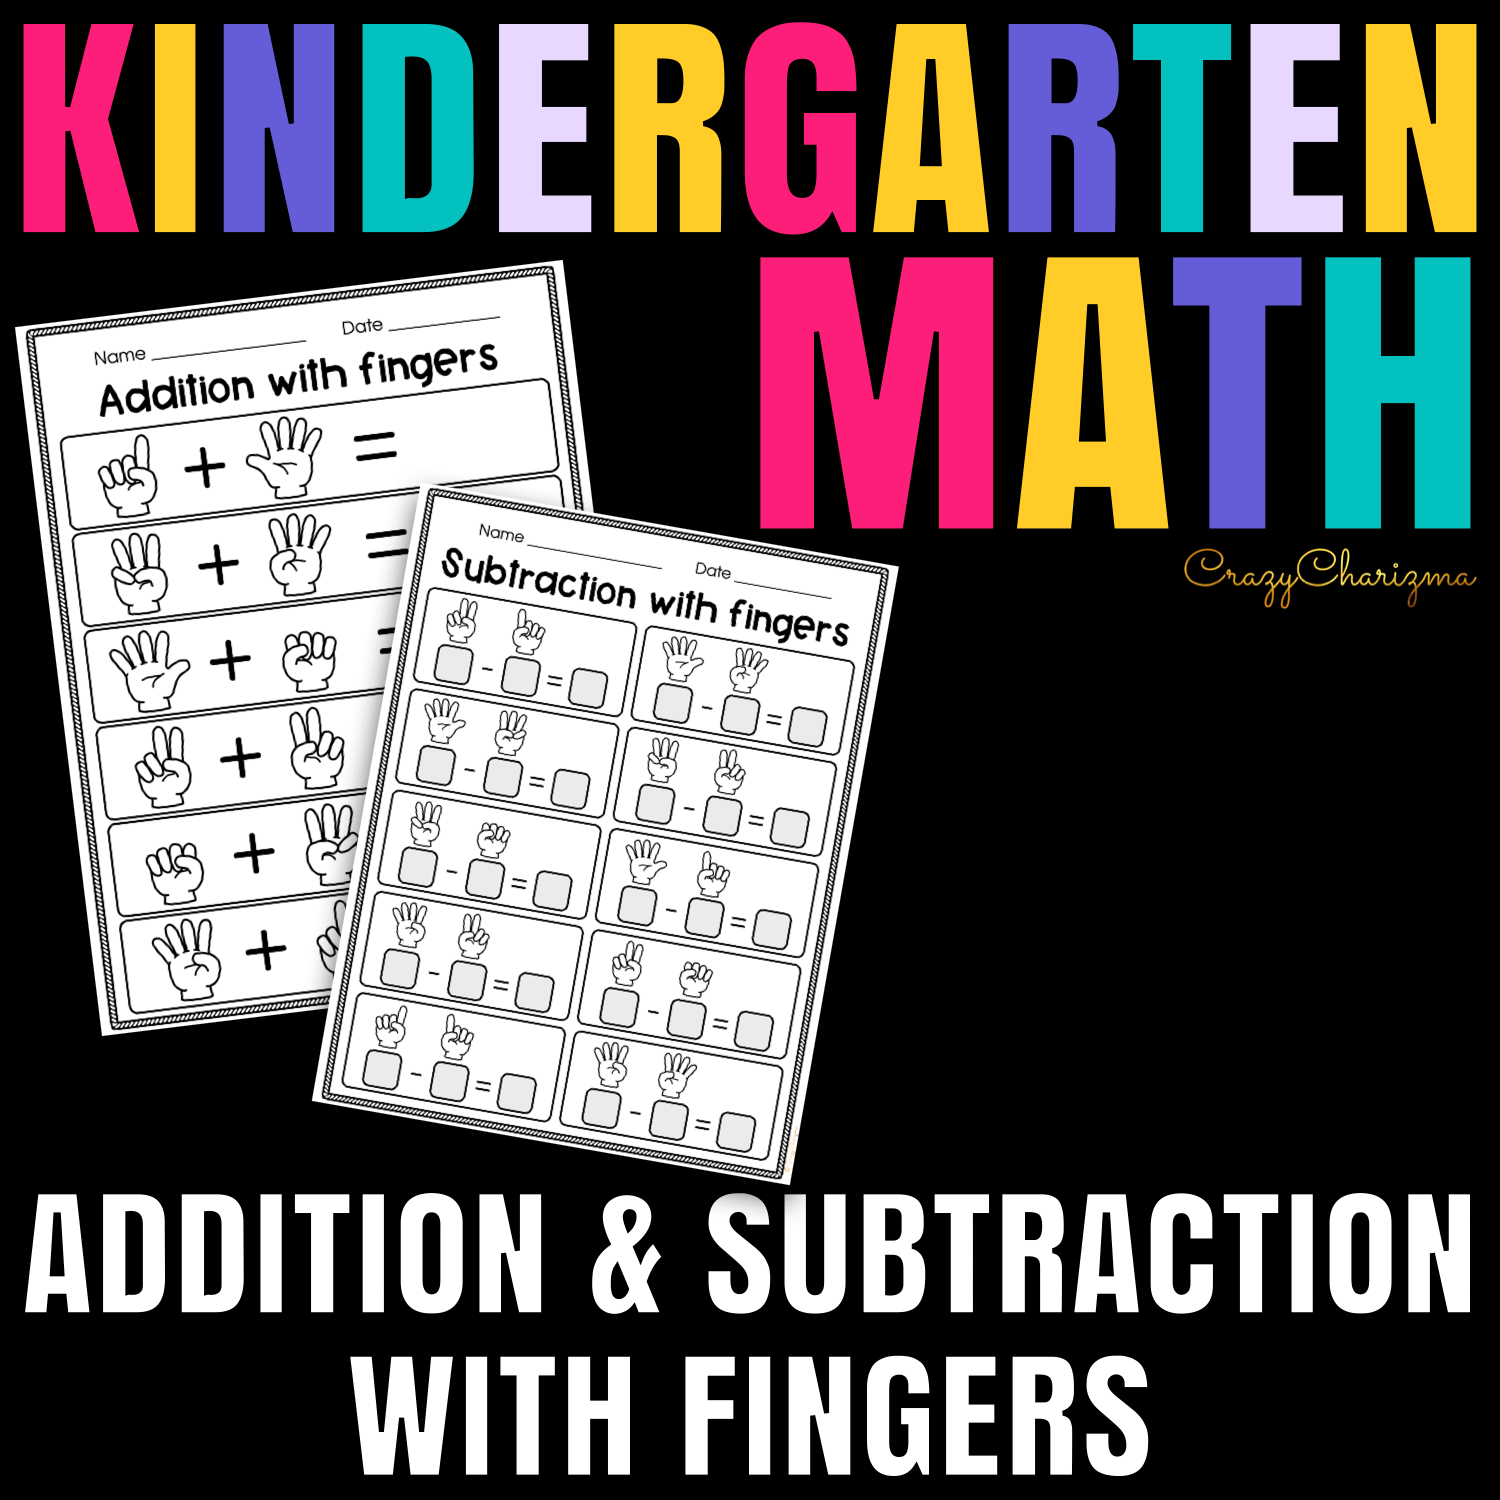 Practice addition and subtraction to 10 with fingers using these no prep worksheets. Find inside 15 pages of practice!